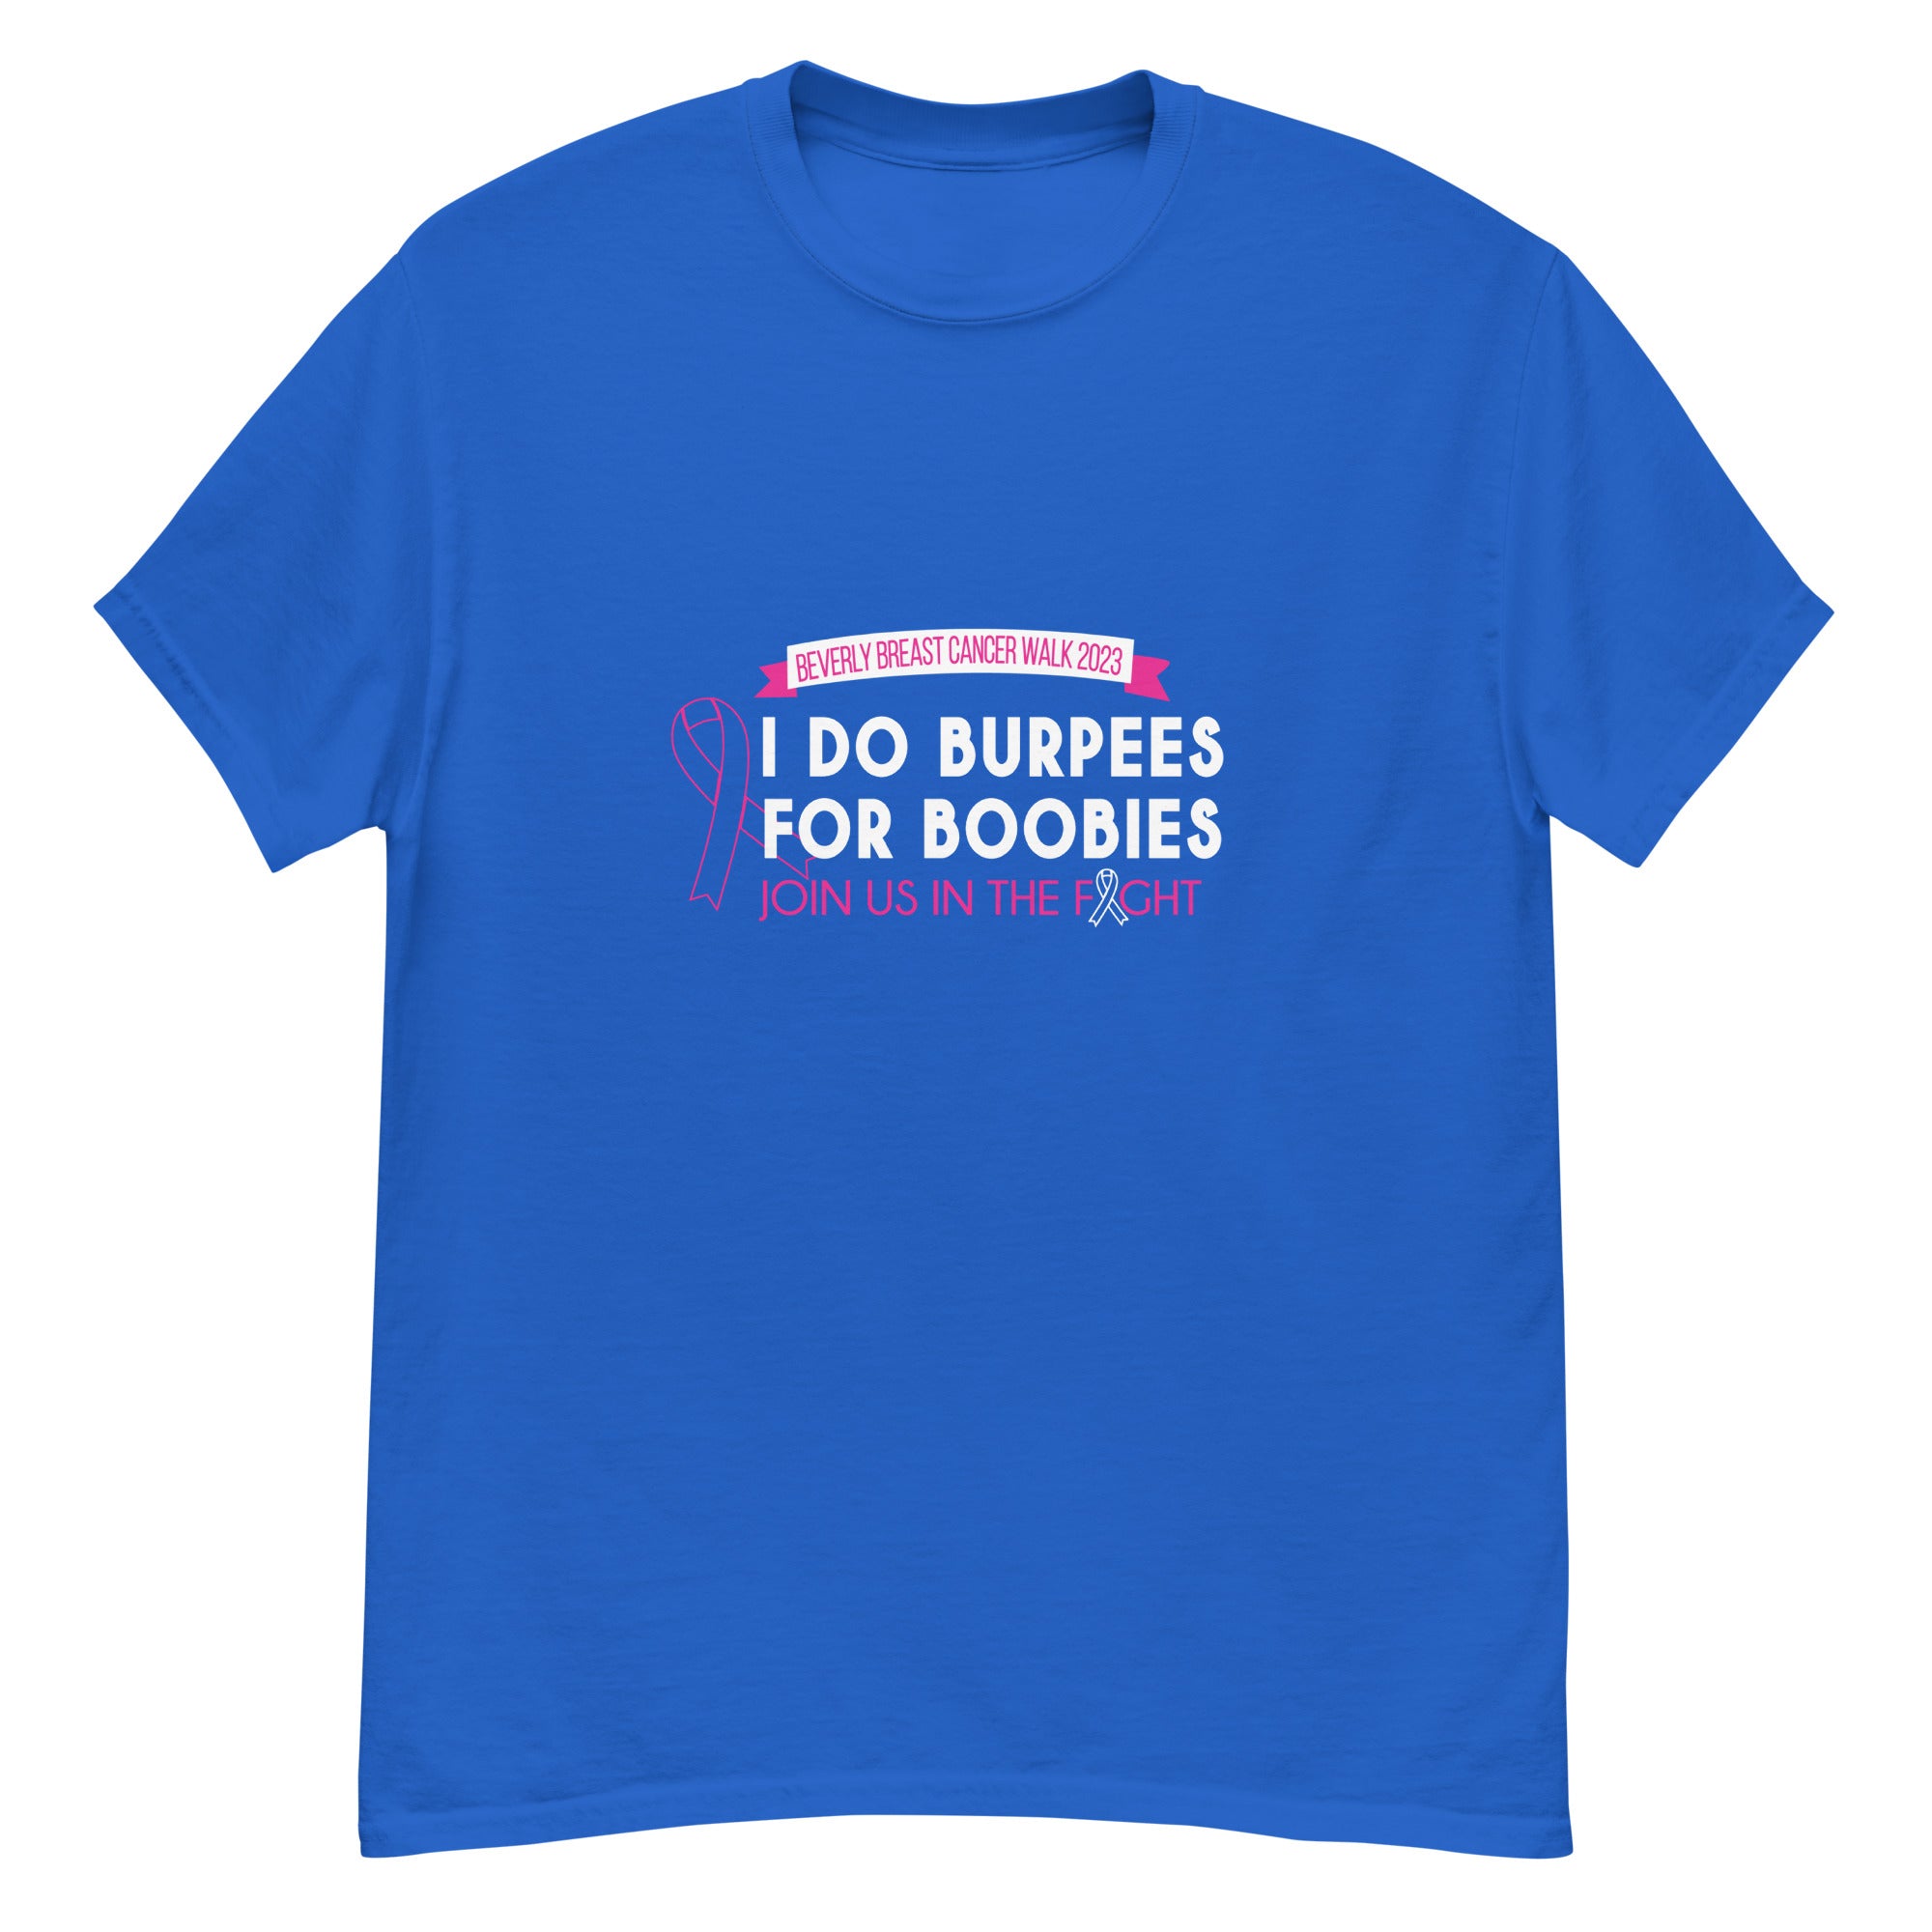 *Burpees for Boobies T-Shirt